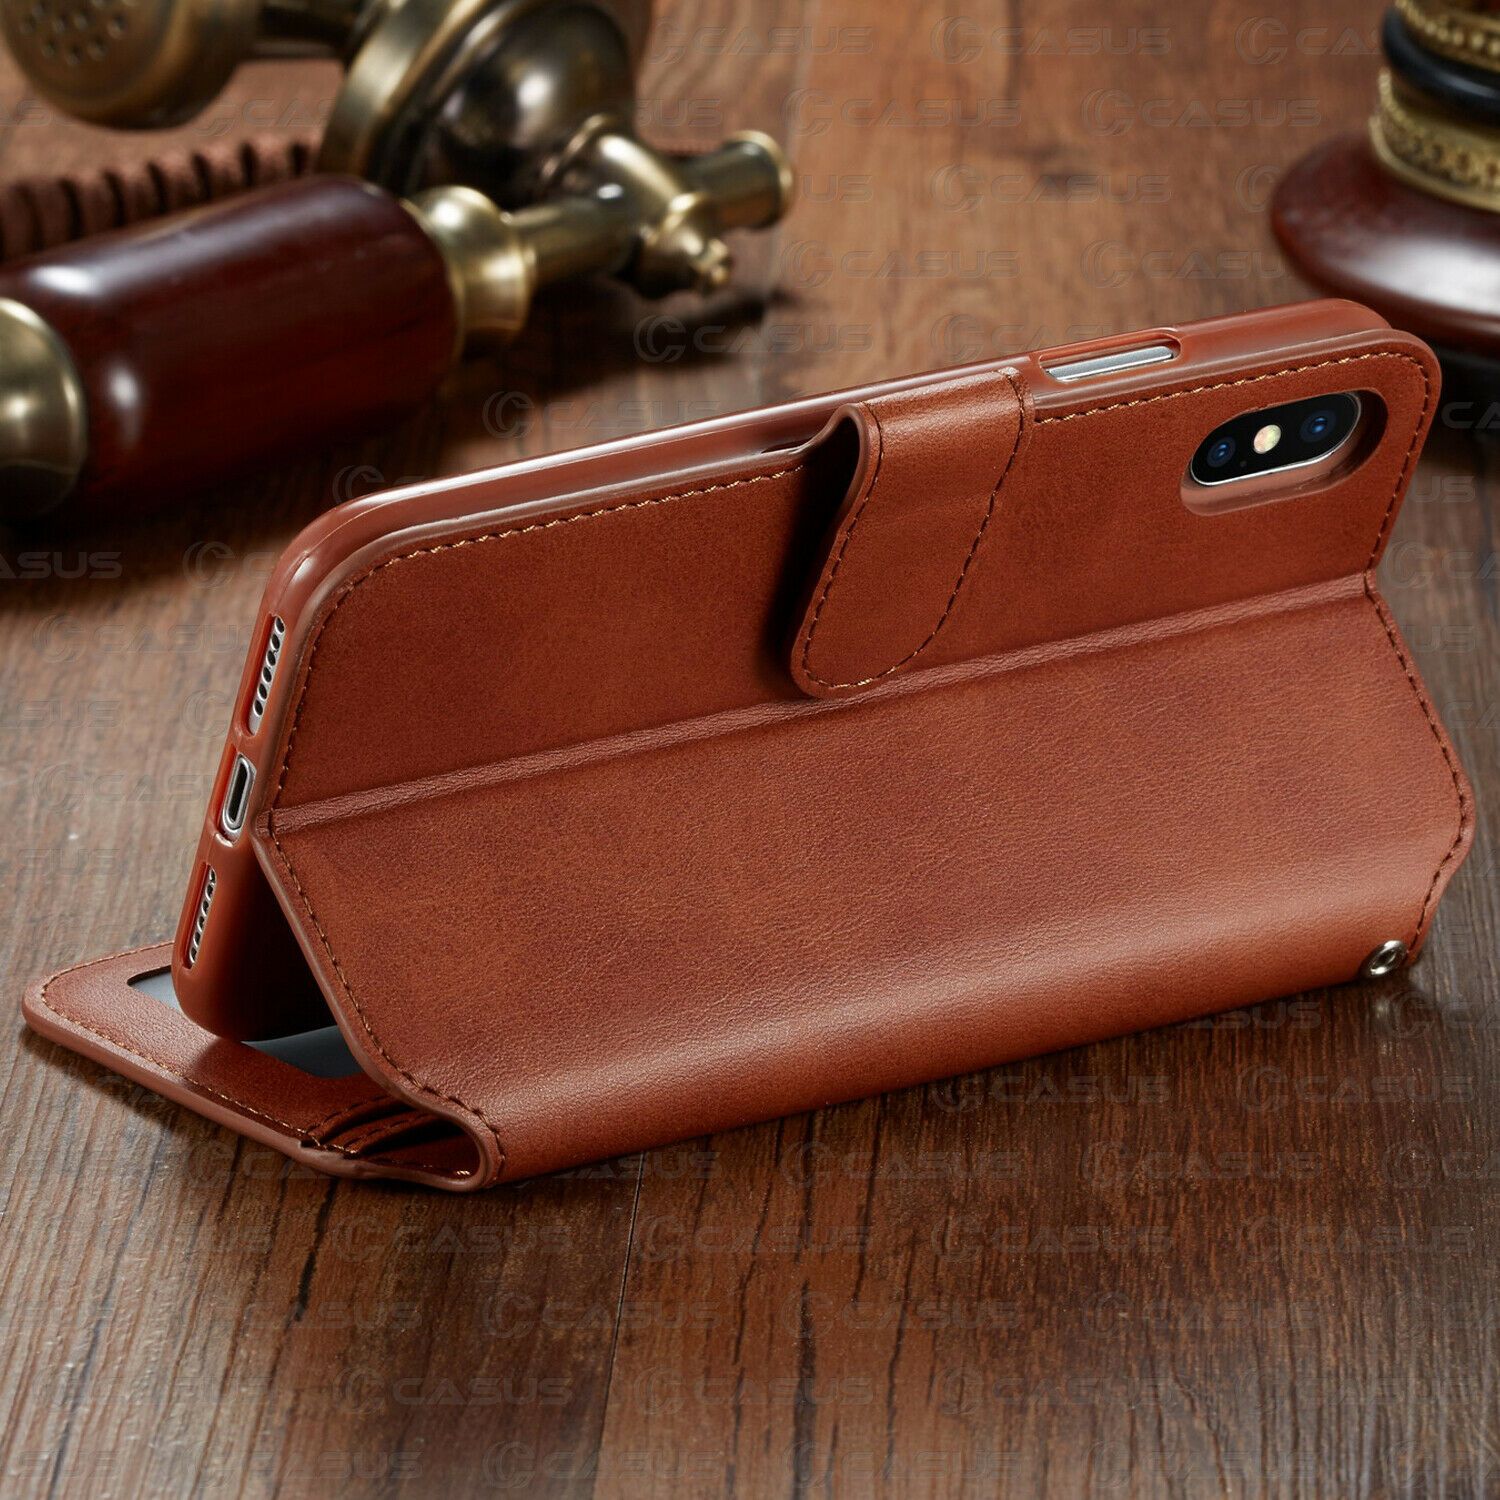 Leather Wallet Flip Card Holder Cover Case For iPhone 11 PRO MAX XR XS 8/6 Plus casuscasescasuscases 